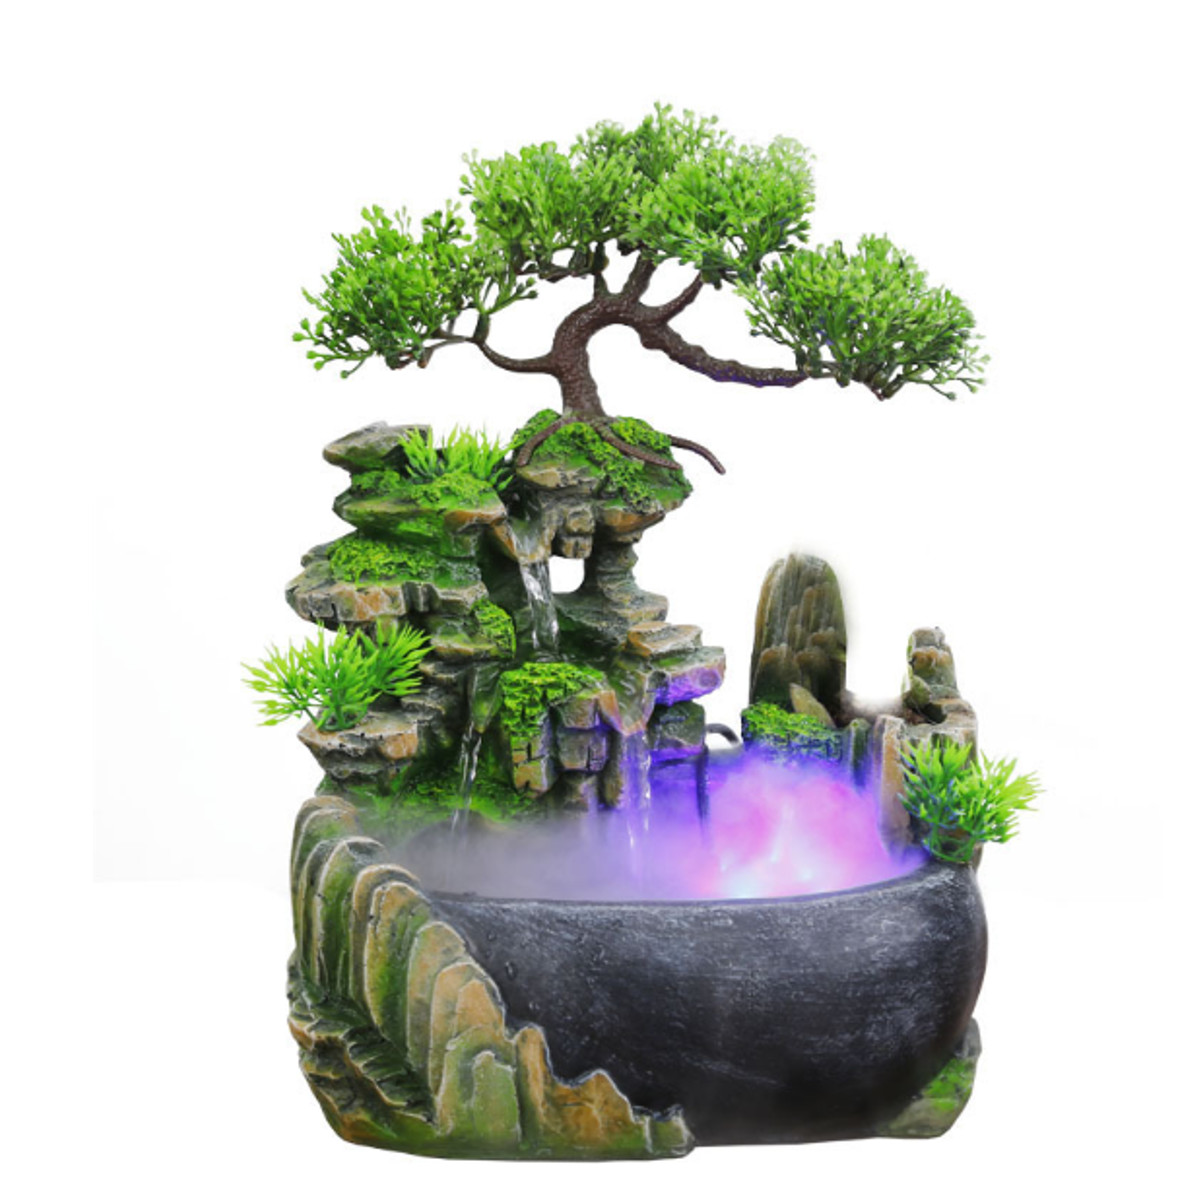 

LED Resin Rockery Fountain View FengShui Figurines Ornament Home Office Decorations